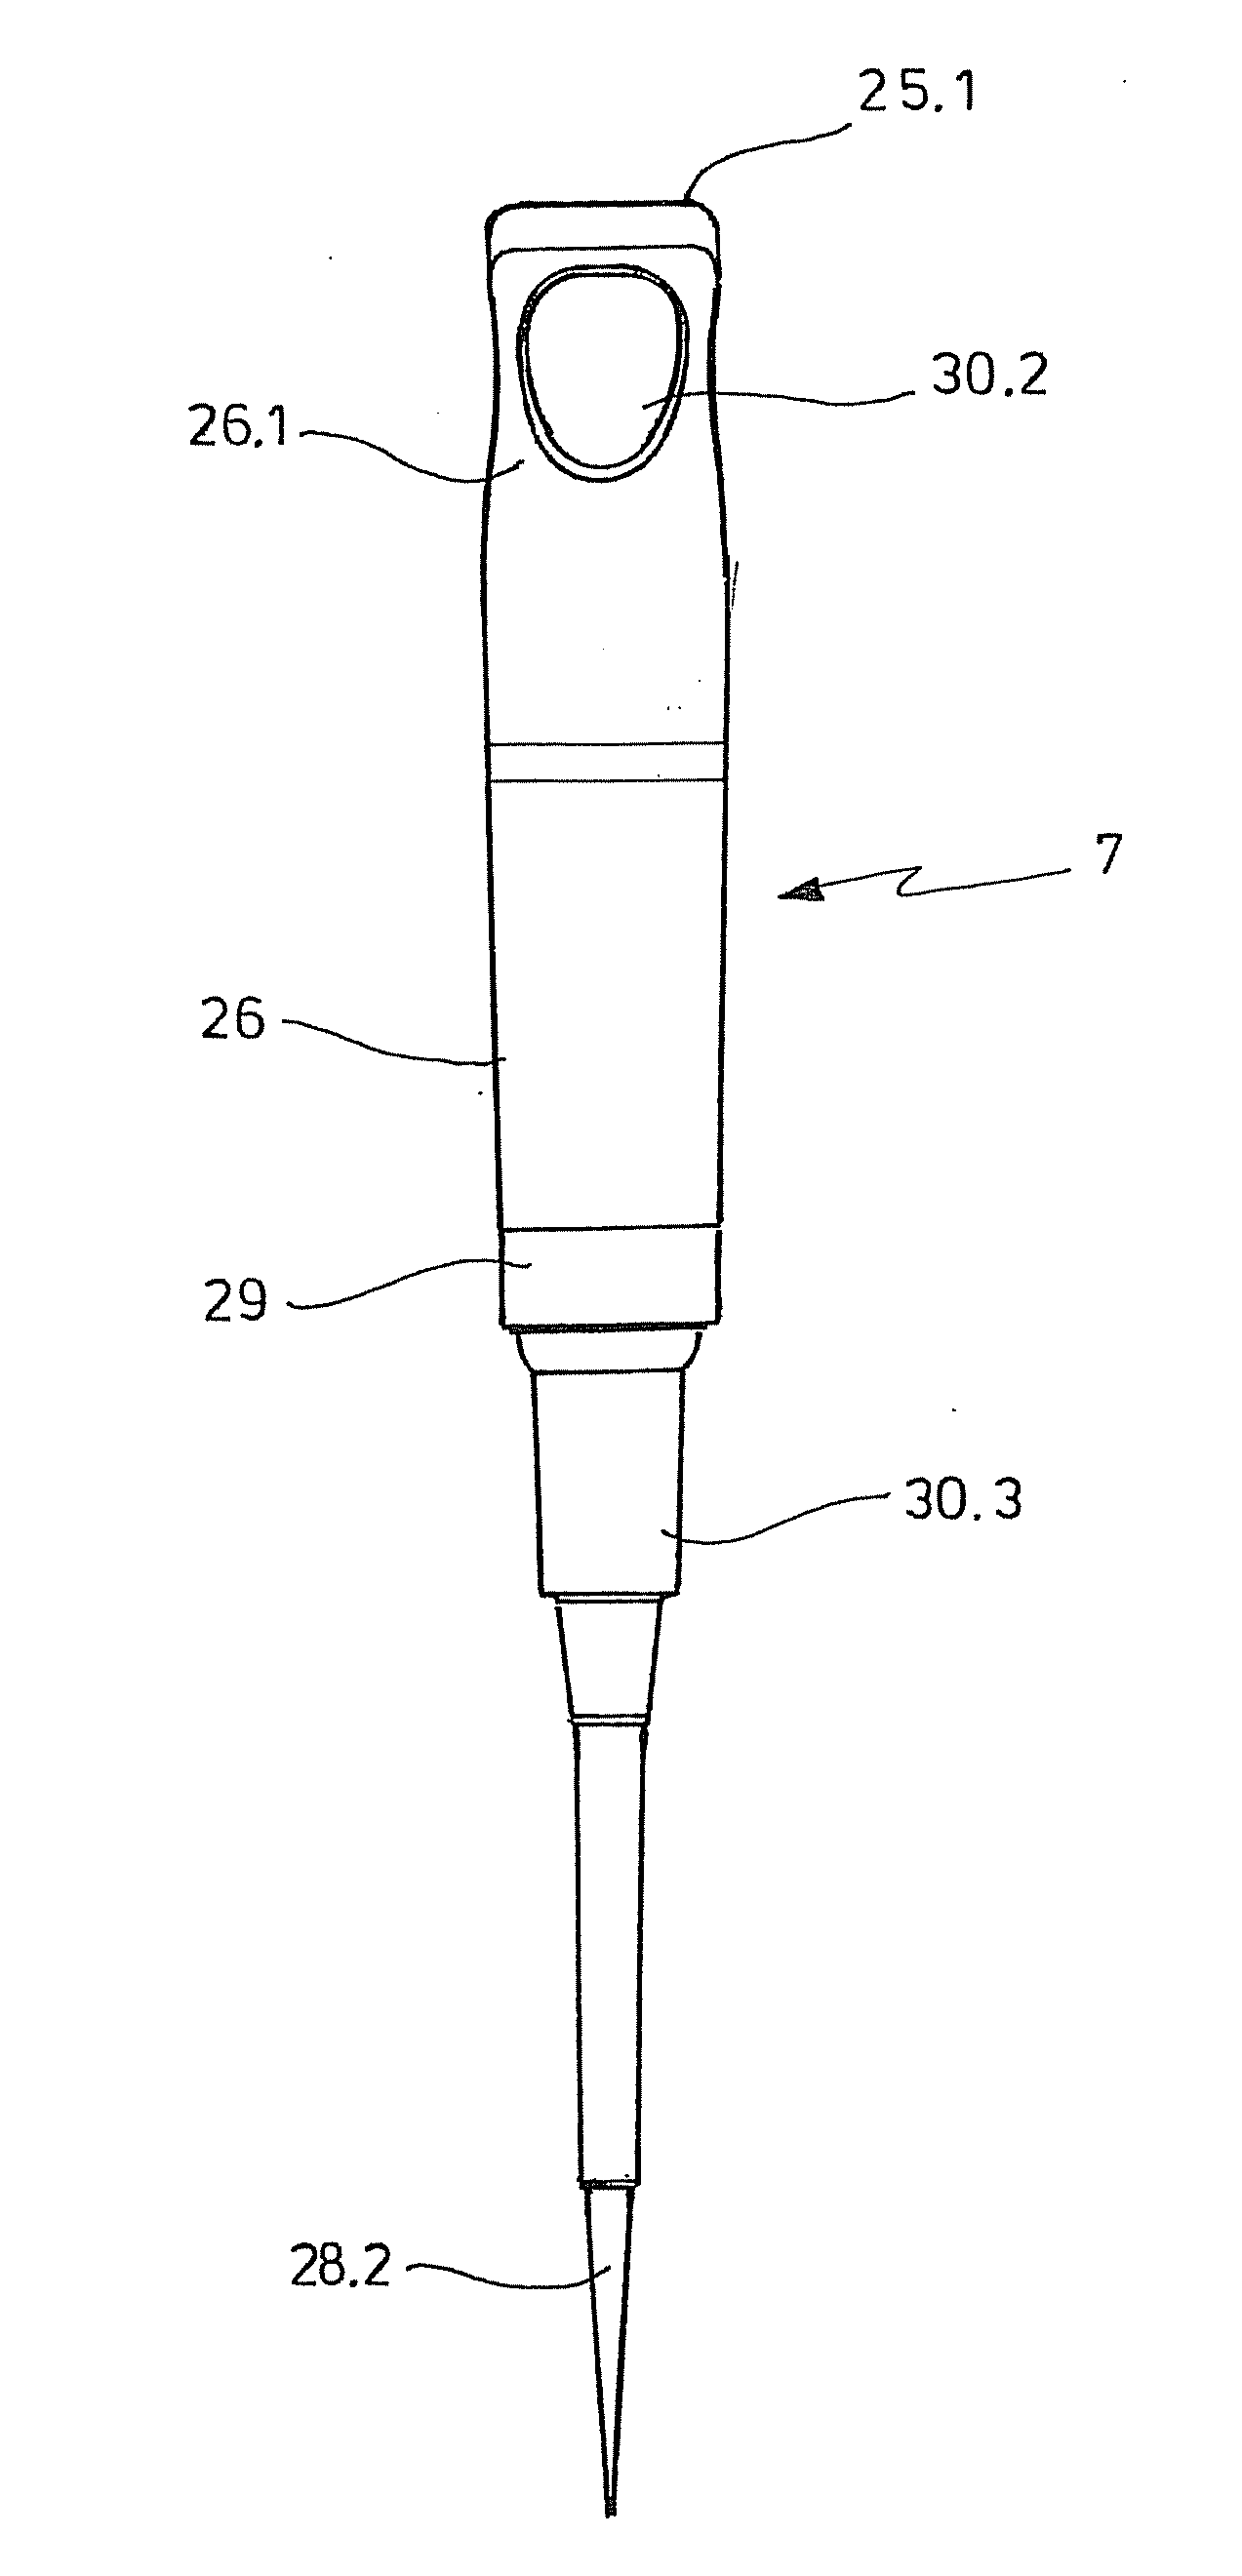 Electronic pipette